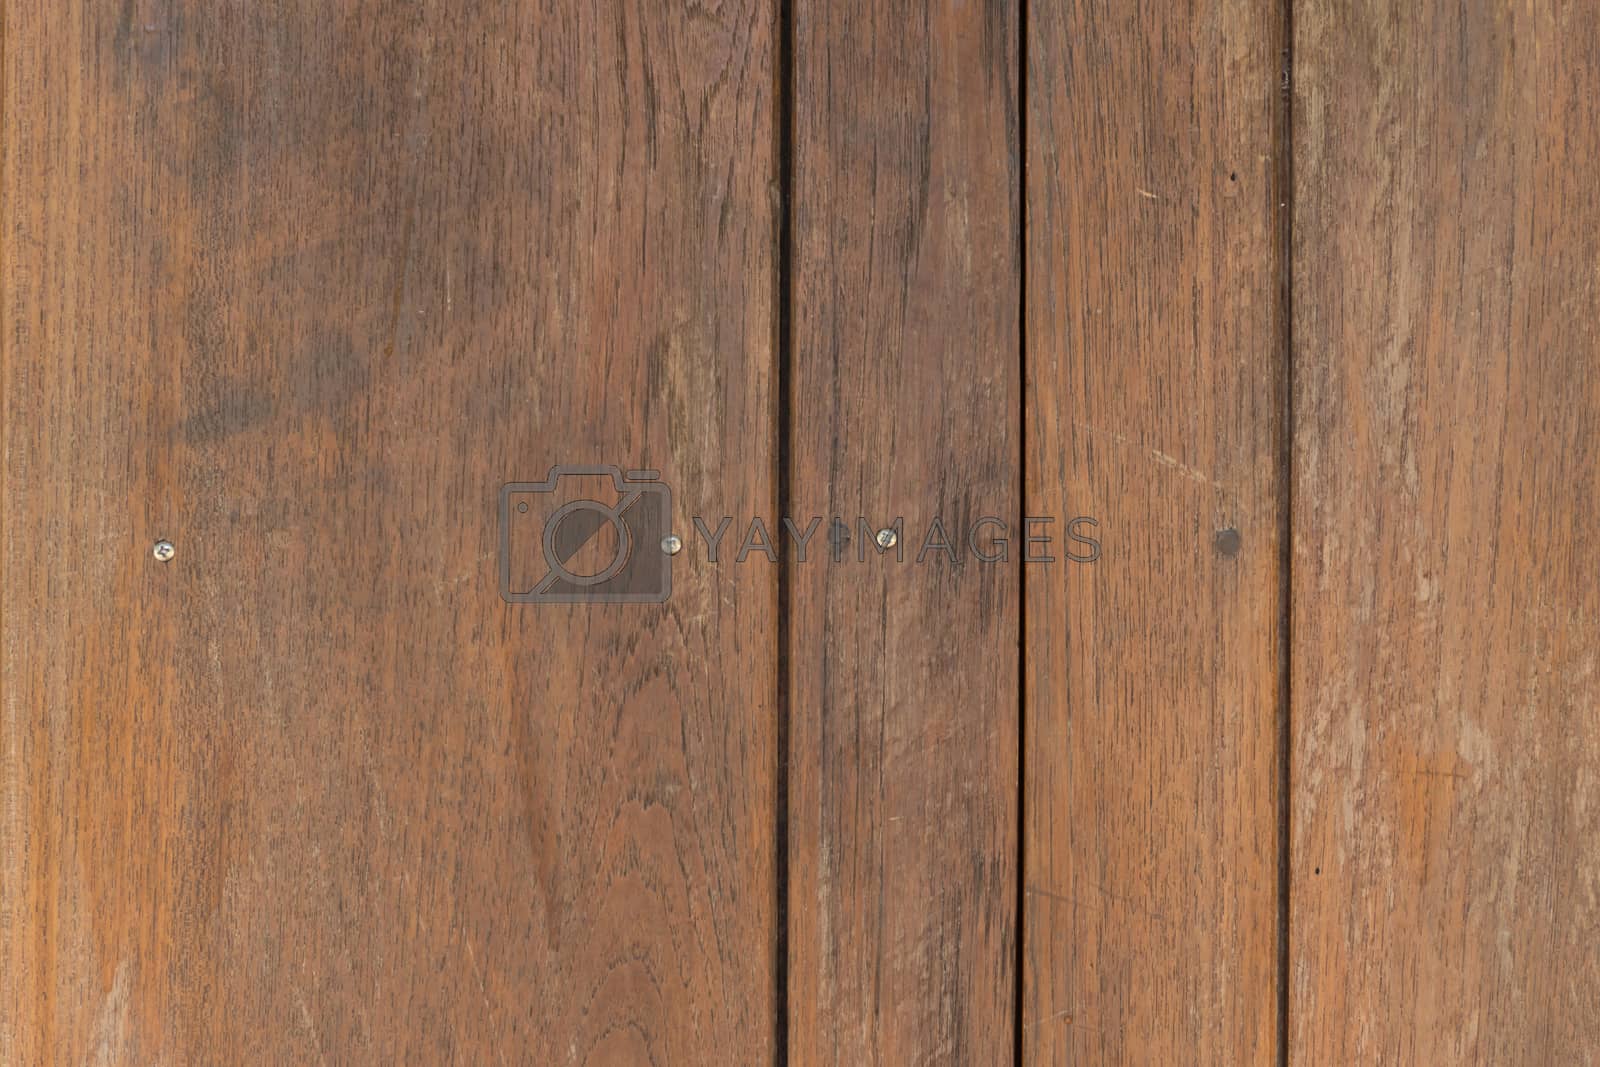 Royalty free image of wood texture with natural pattern by teerawit